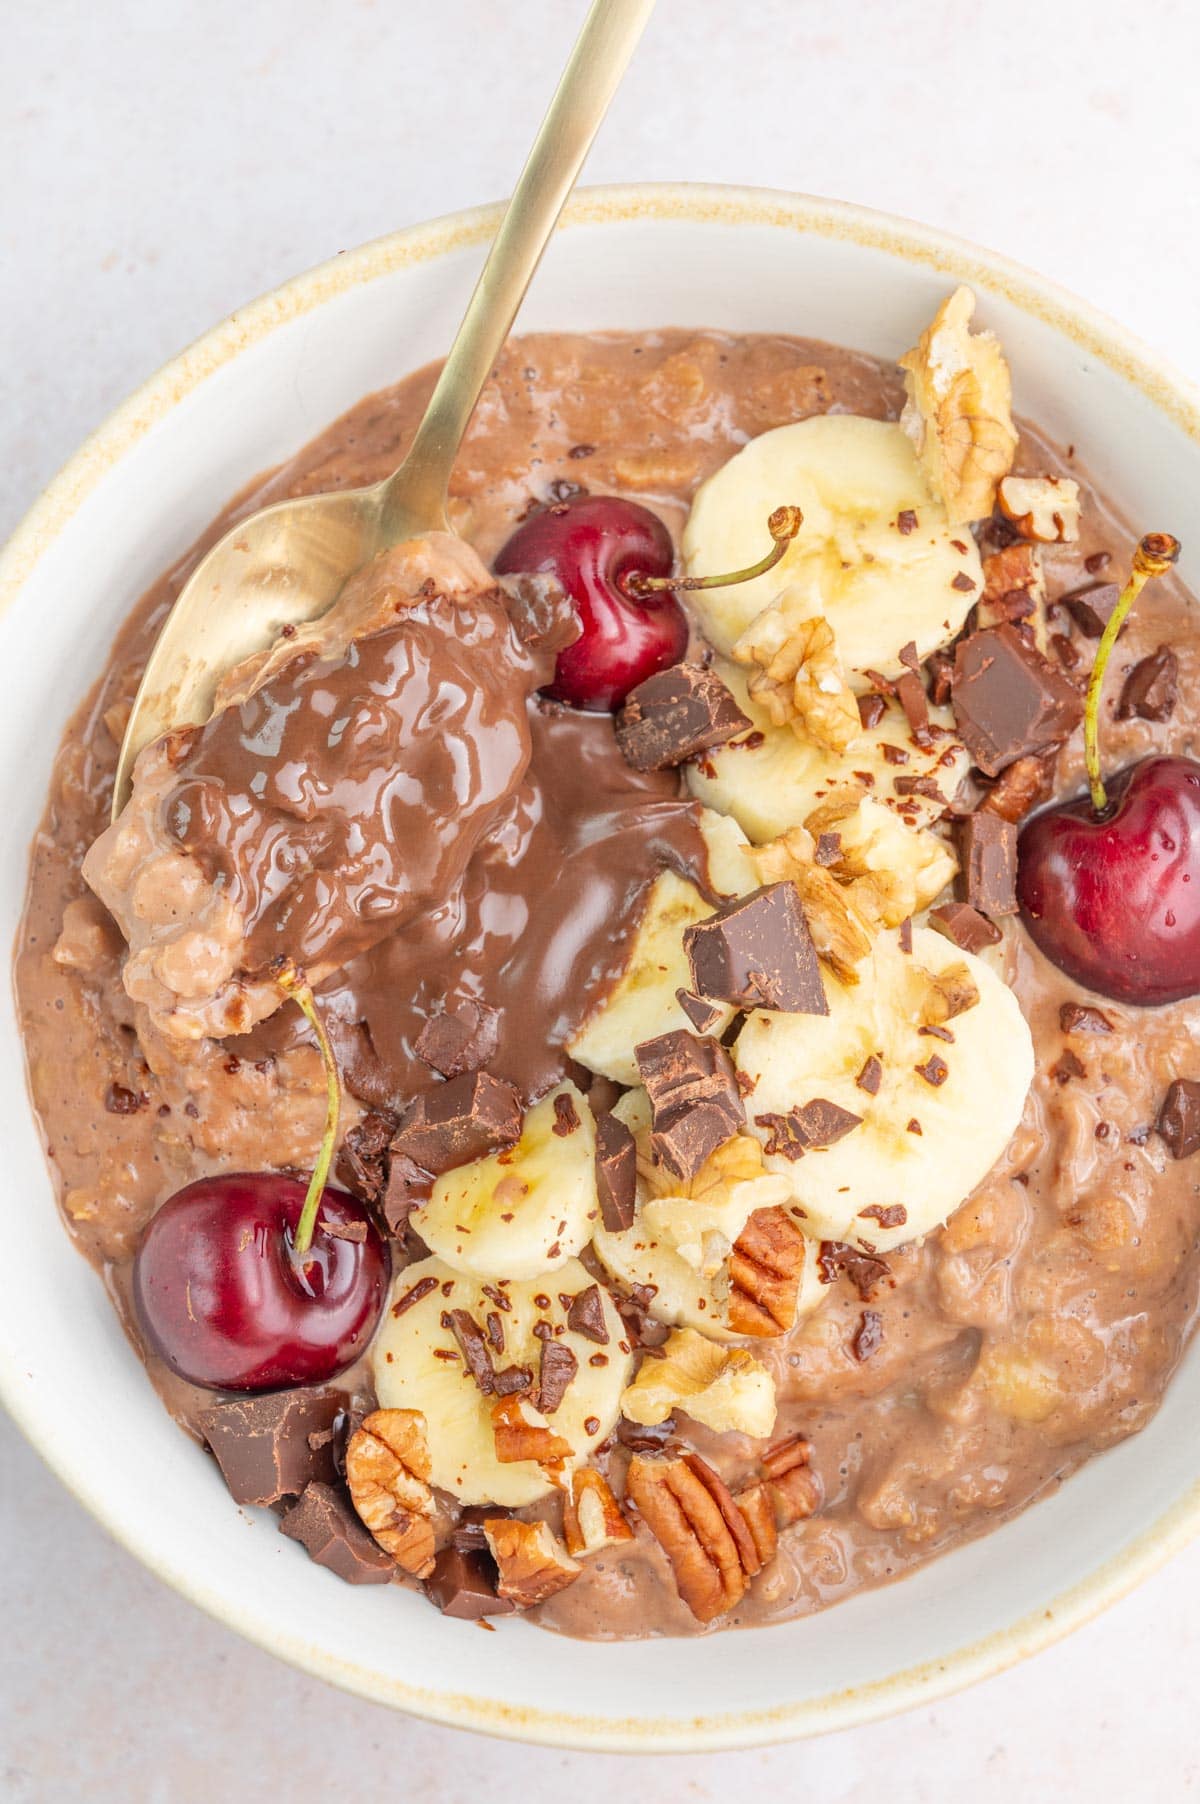 Banana chocolate oatmeal in a white bowl topped with banana slices, chocolate chunks, and cherries.